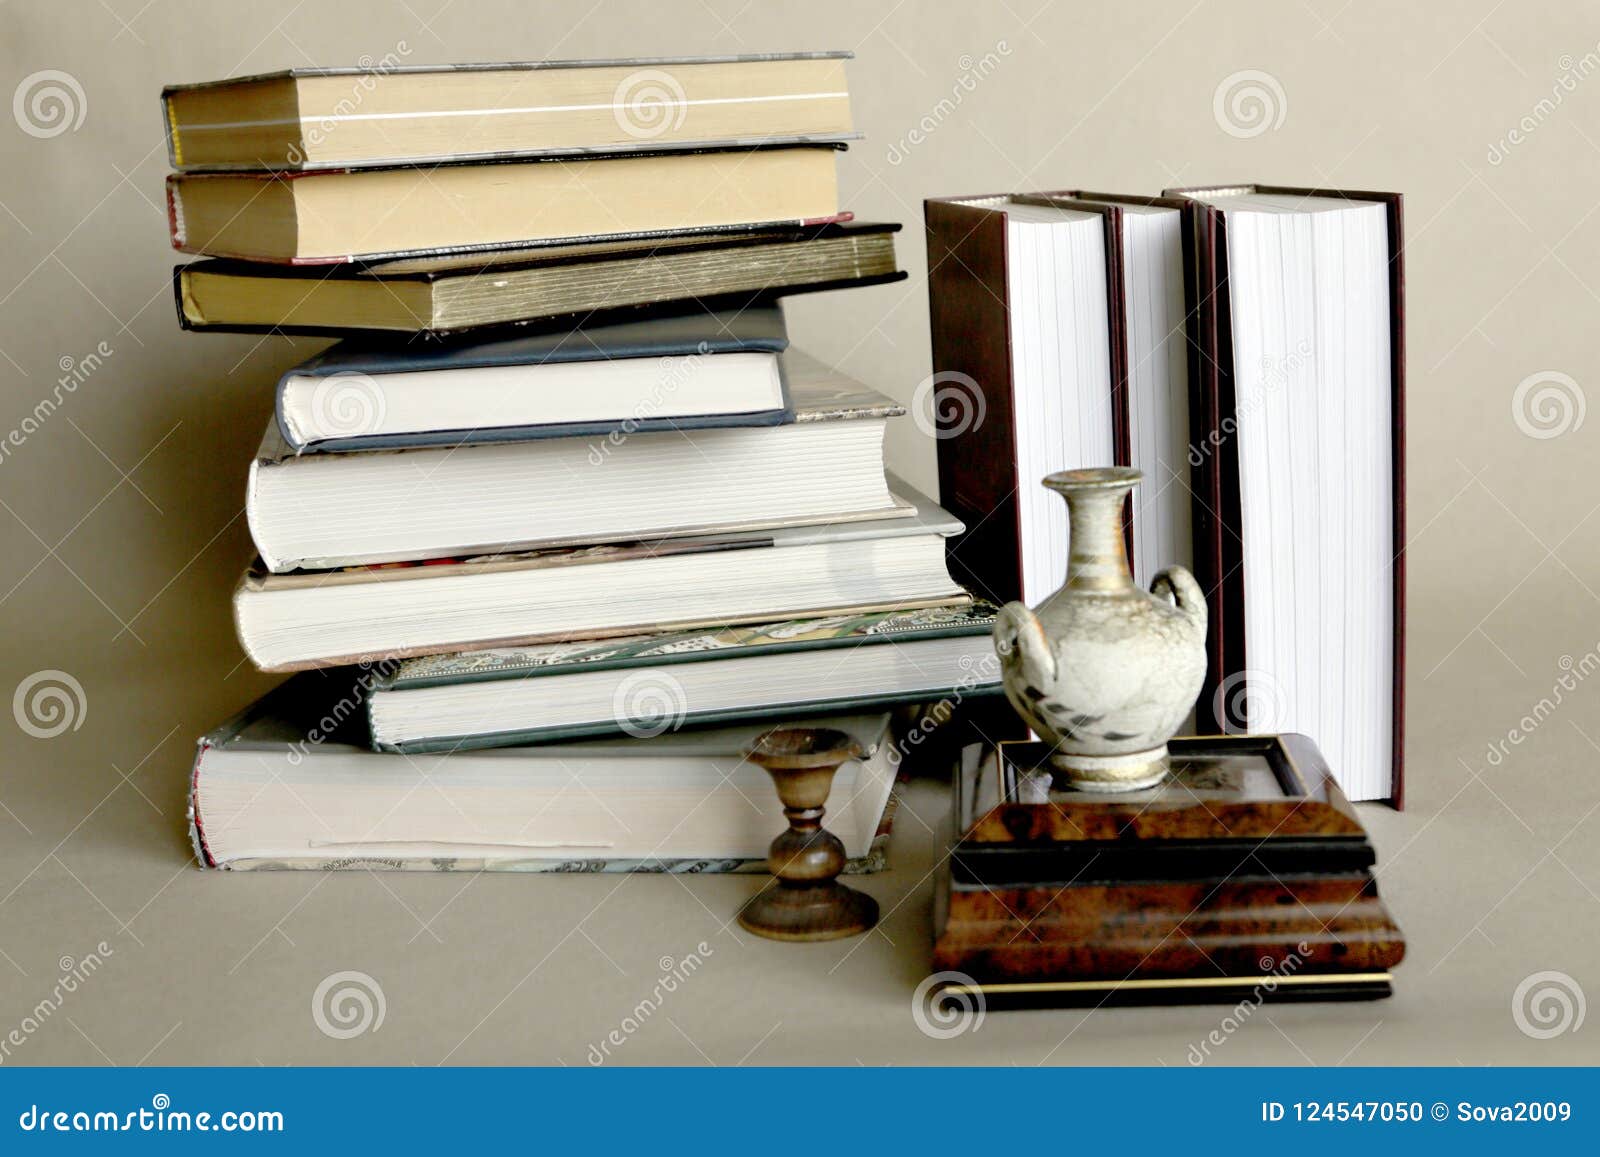 Stack of Books in the Workplace Stock Photo - Image of instruct